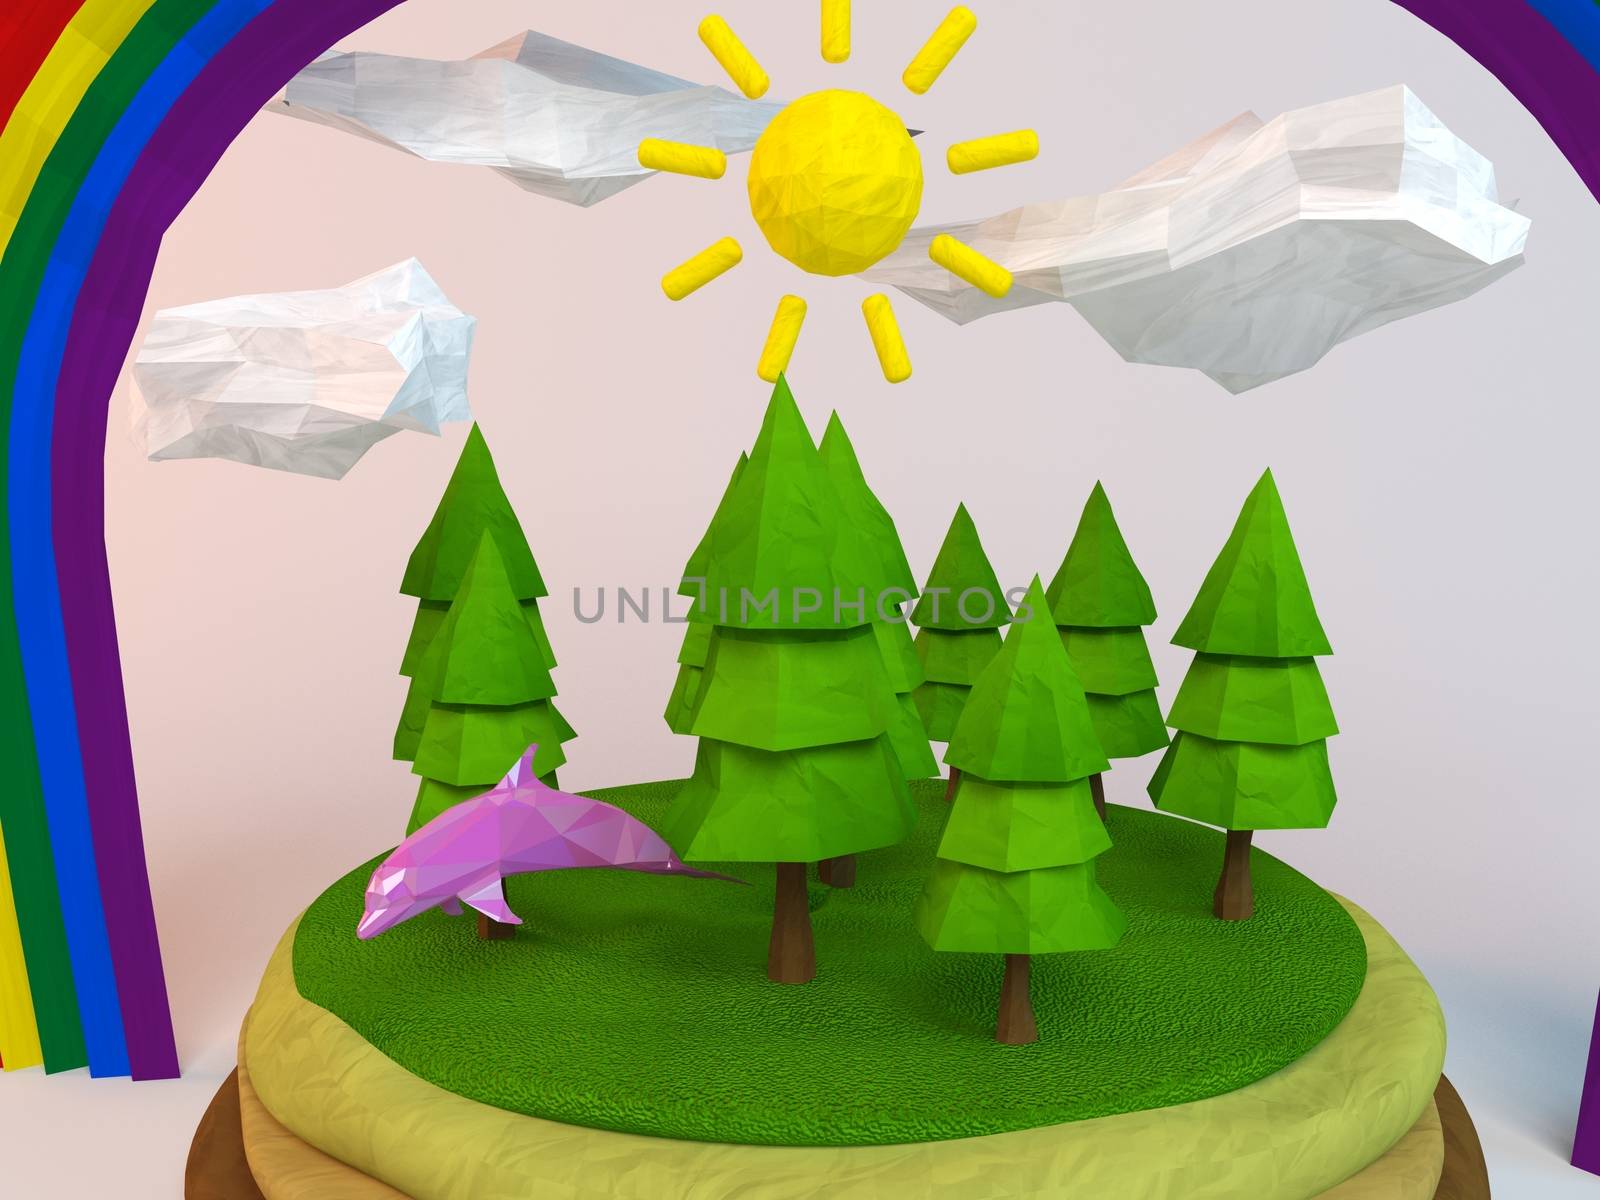 3d dolphin inside a low-poly green scene with sun, trees, clouds and a rainbow